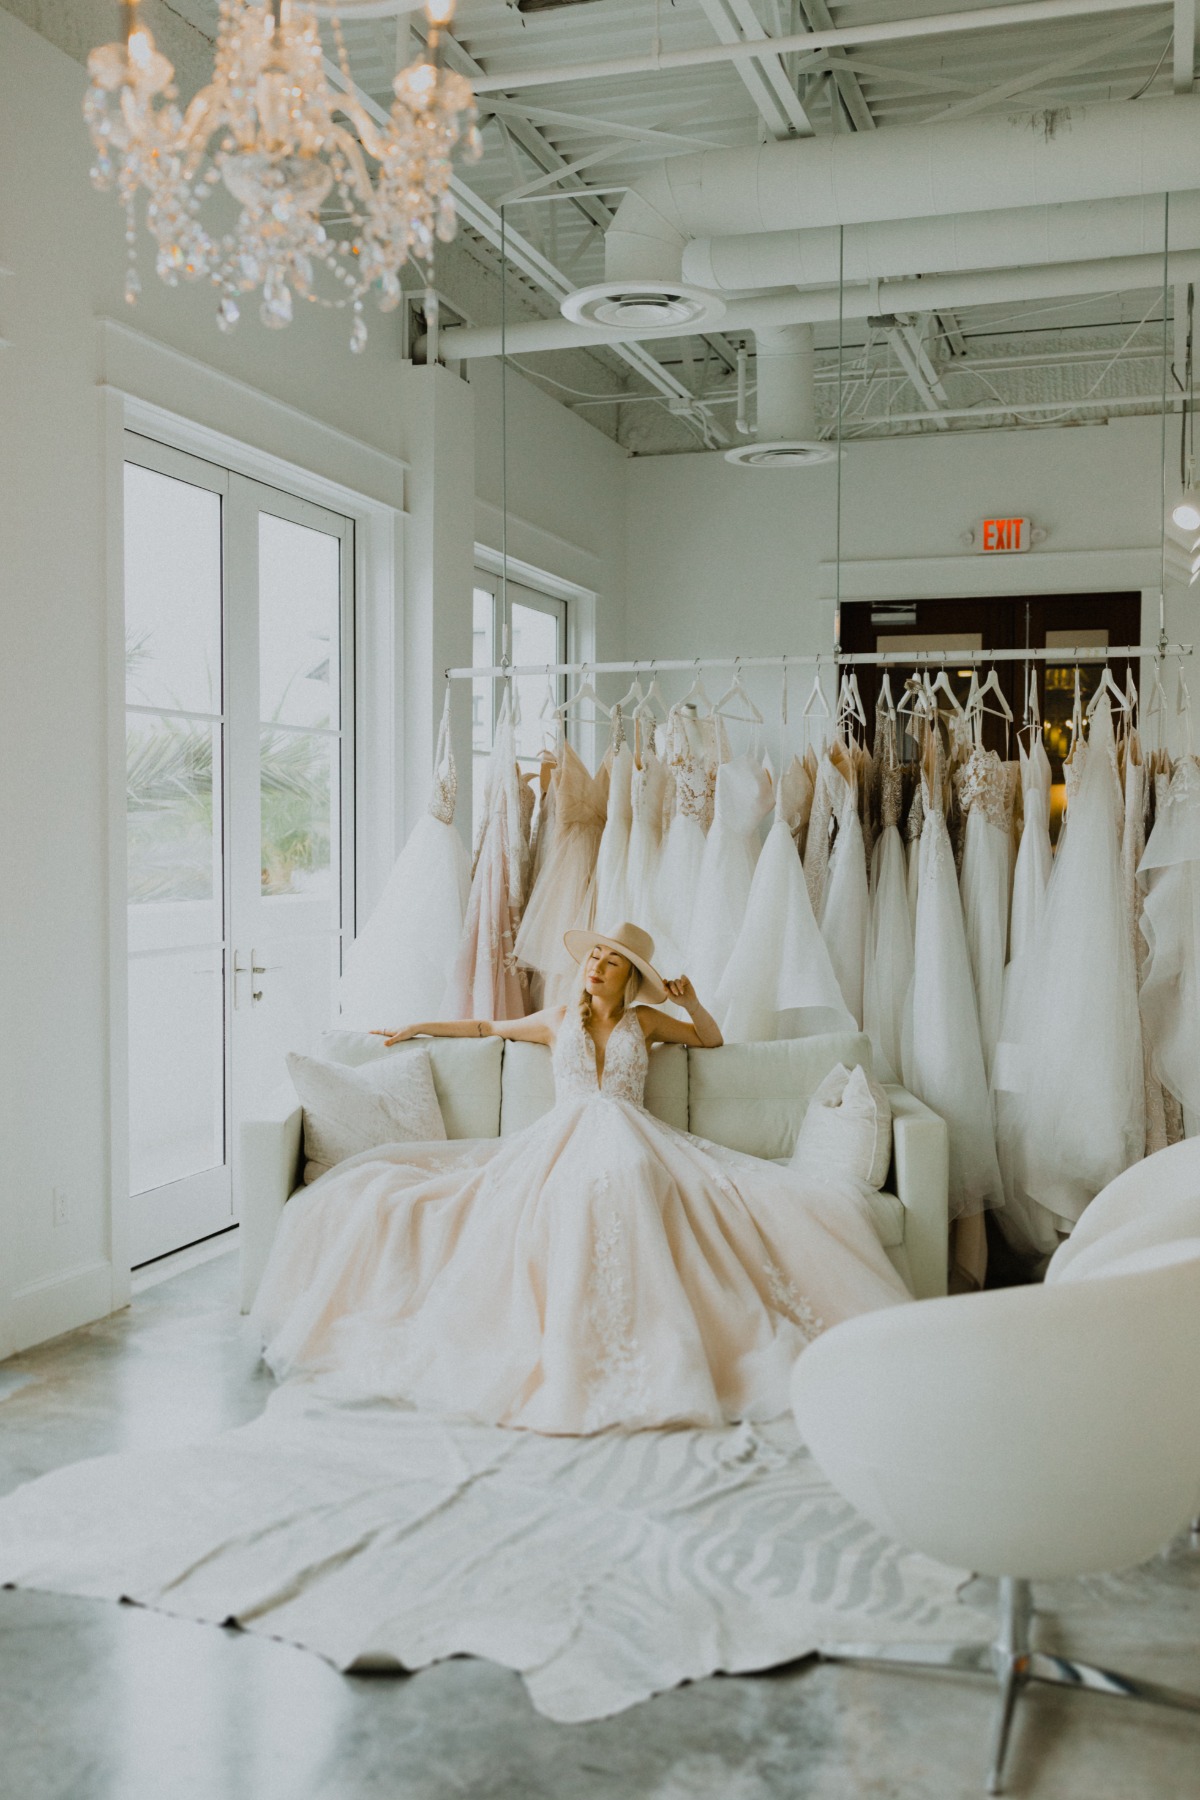 5 Tips for Saying "Yes" to Your Dress